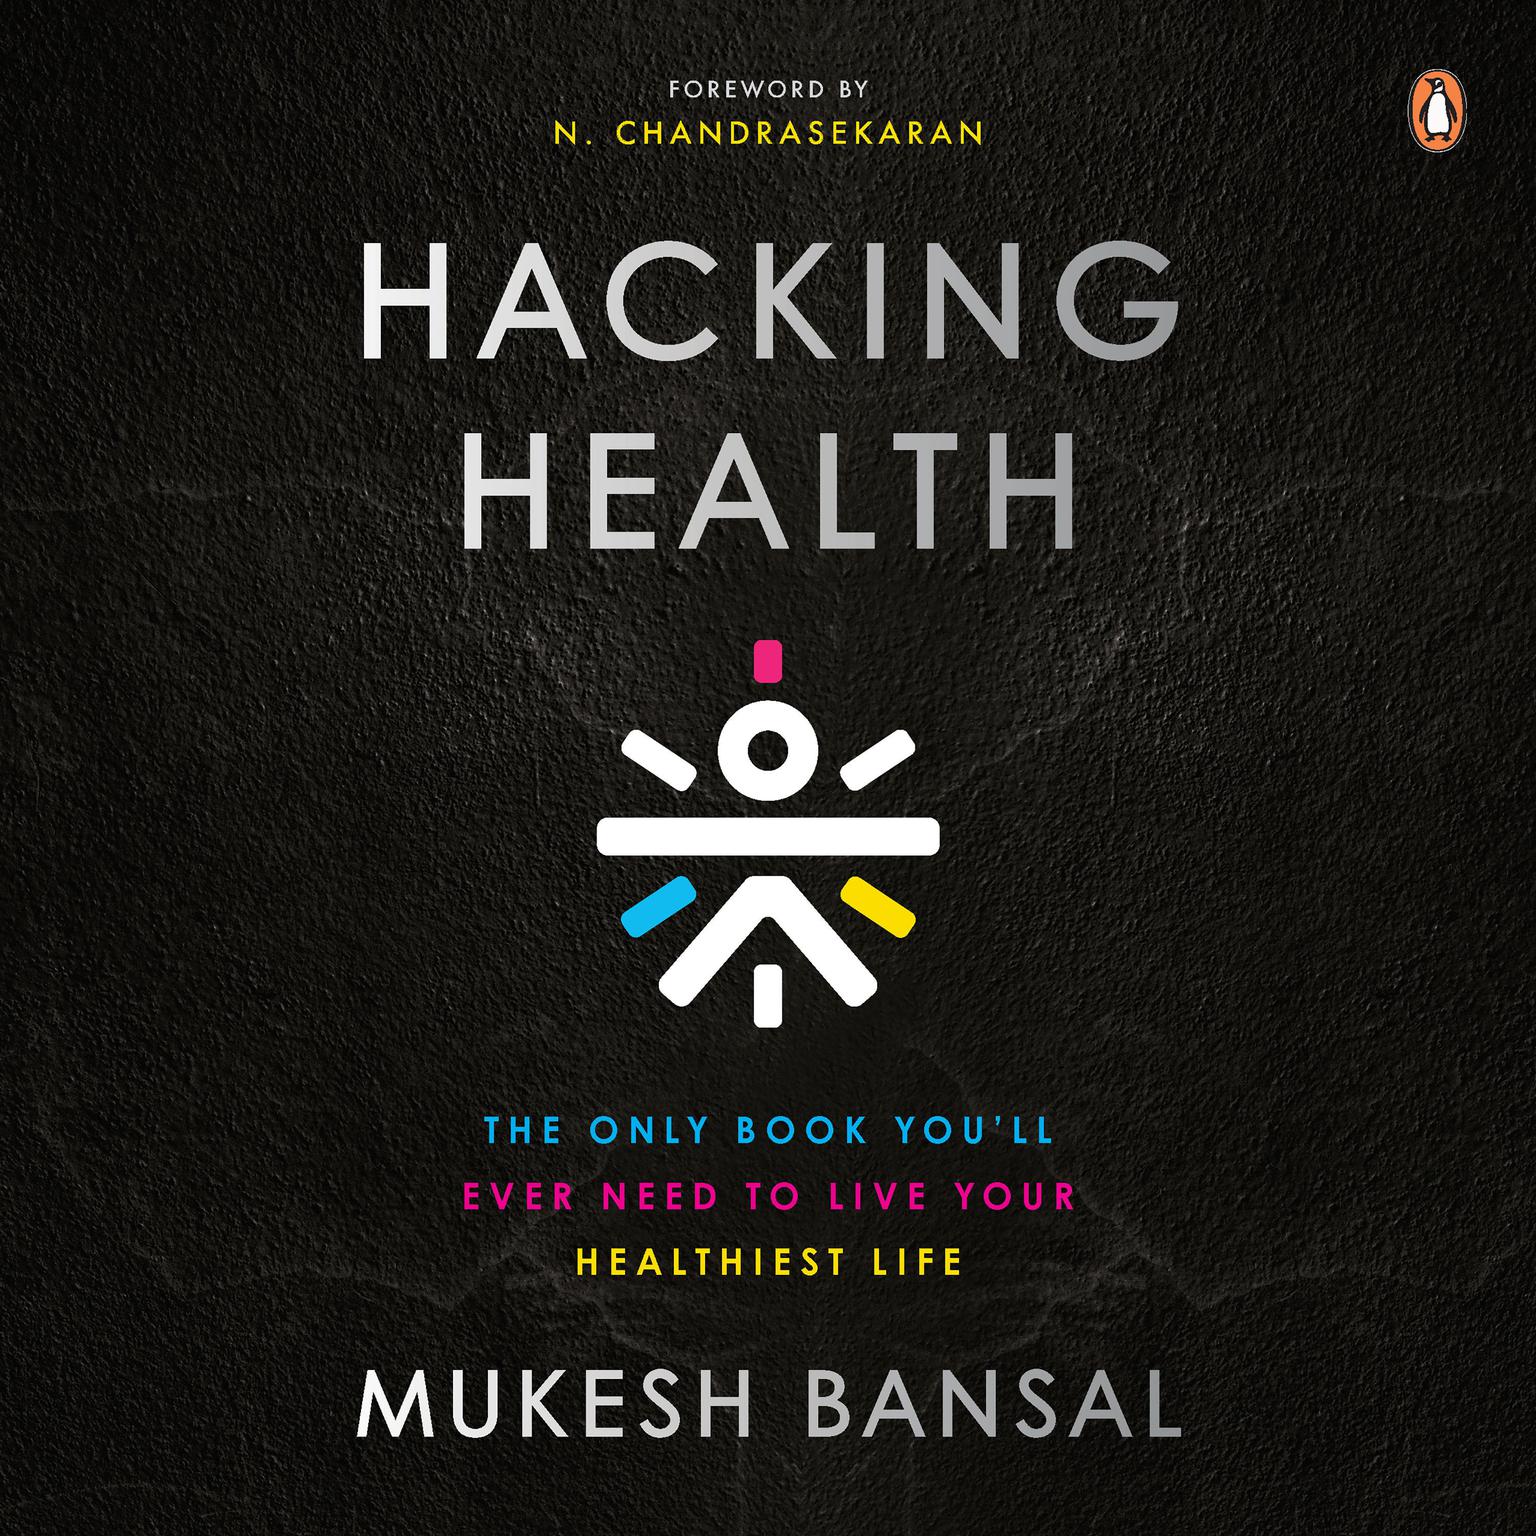 Hacking Health: The Only Book You’ll Ever Need to Live Your Healthiest Life: The Only Book You’ll Ever Need to Live Your Healthiest Life Audiobook, by Mukesh Bansal